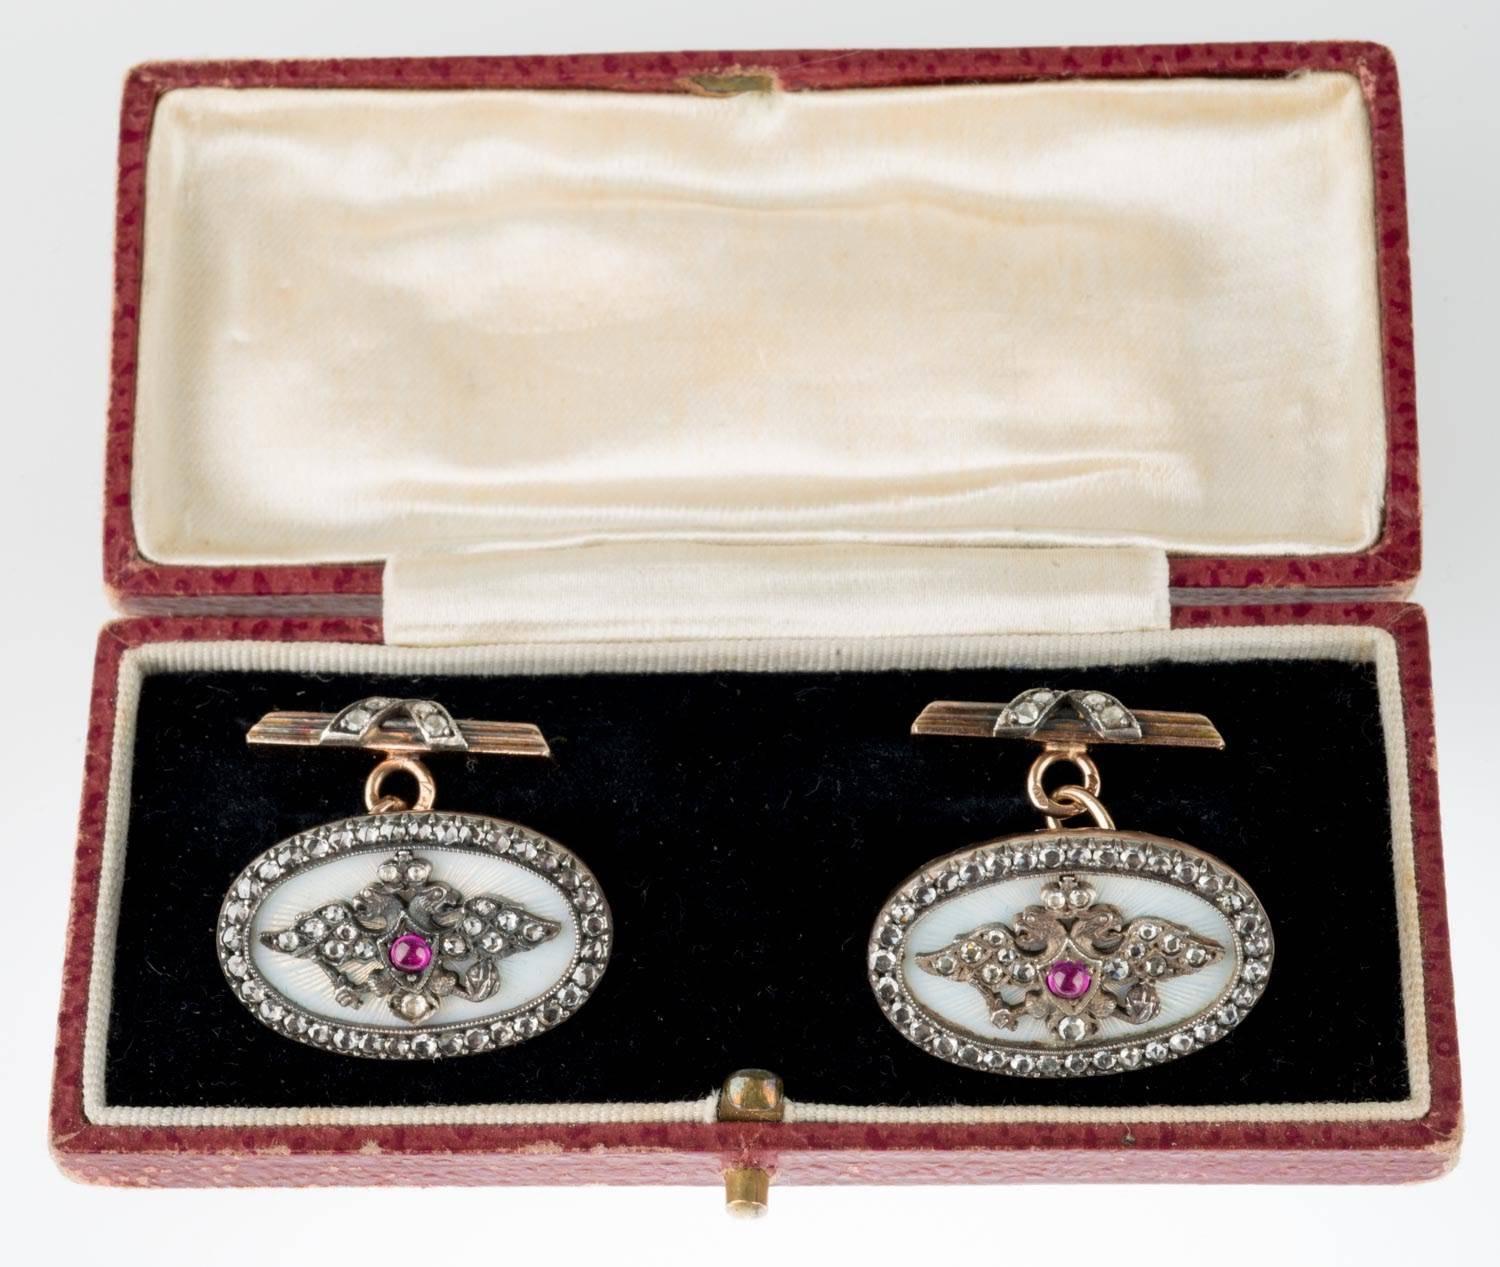 19th Century August Hollming Workmaster for Faberge Guilloche Enamel Gold Diamond Cuff Links